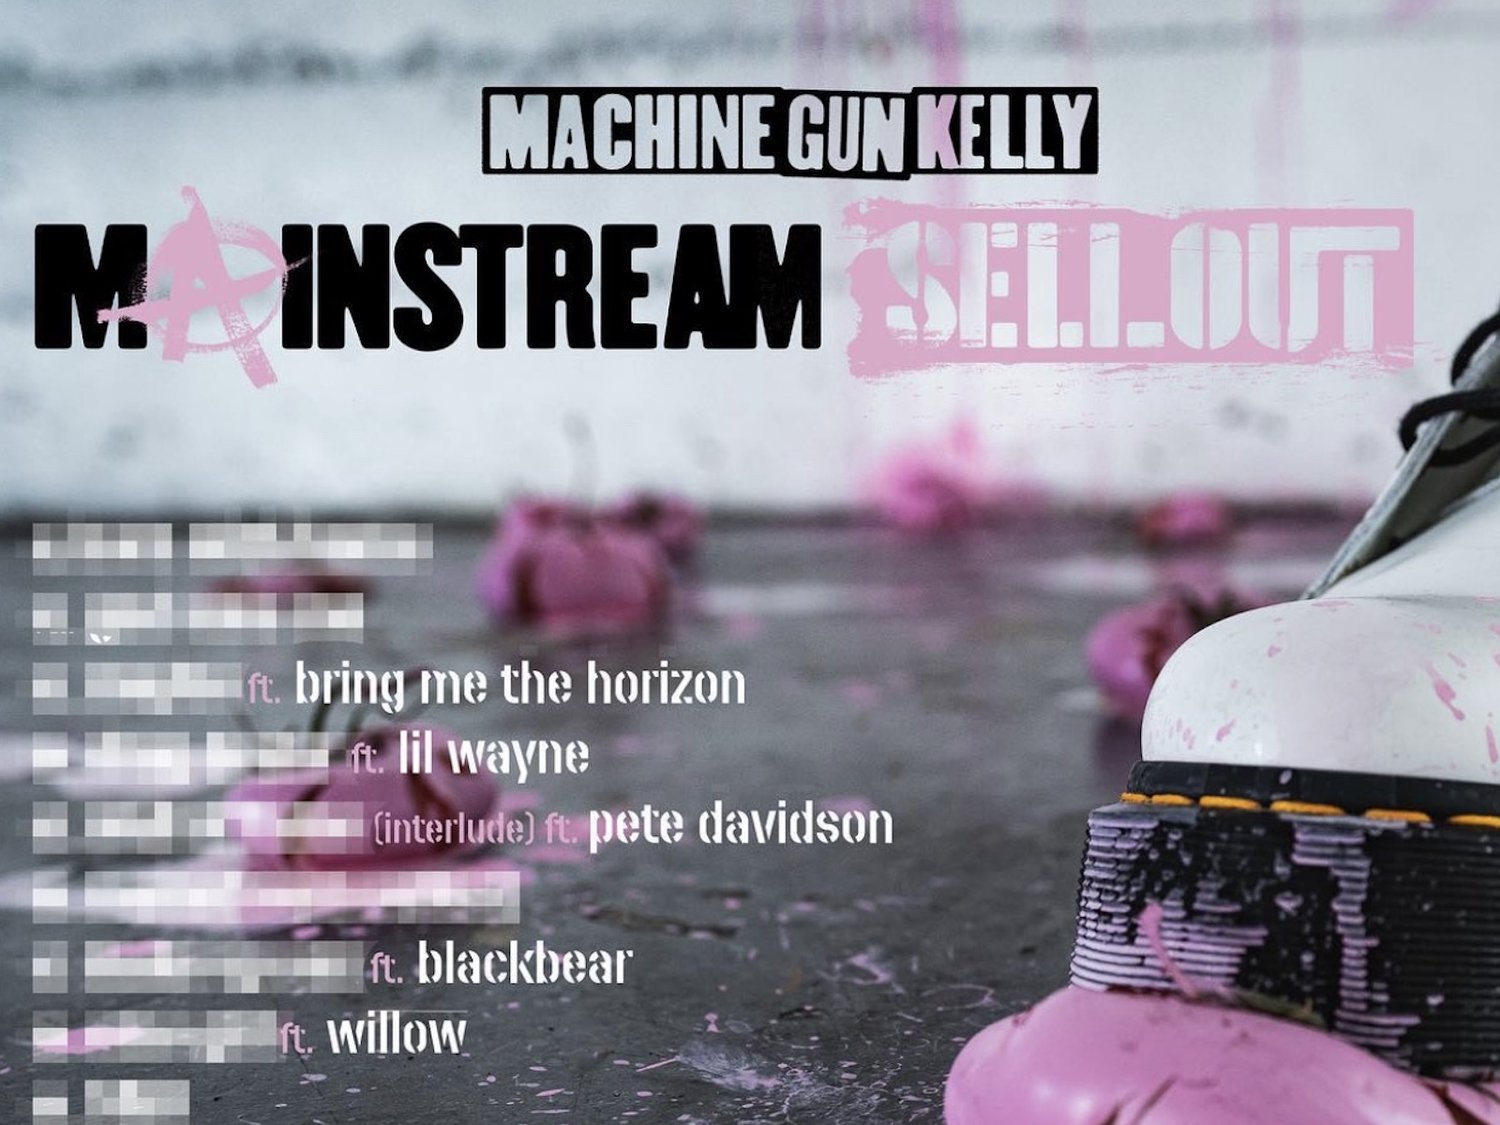 Machine Gun Kelly leans on Spotify for huge 'mainstream sellout' featured artists reveal